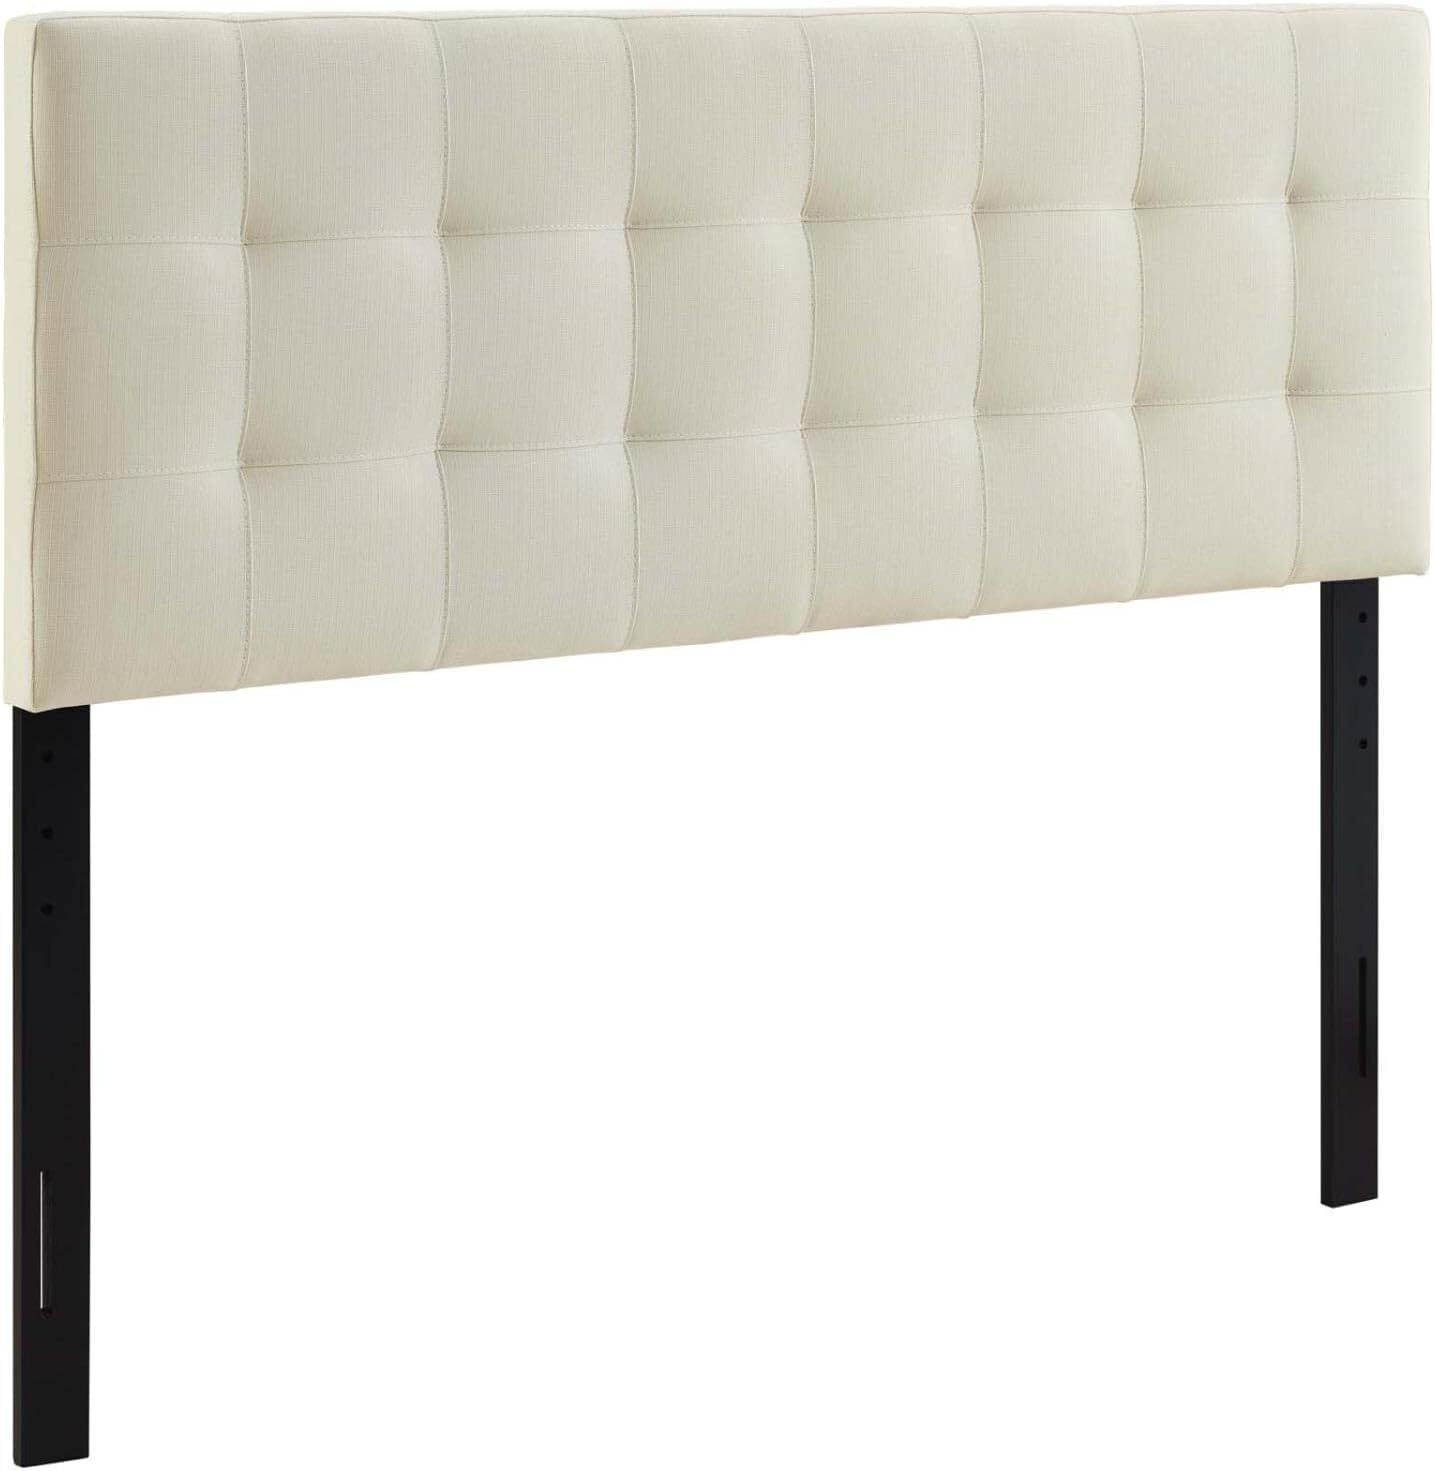 Modway Lily Tufted Linen Fabric Upholstered King Headboard in King, Ivory 